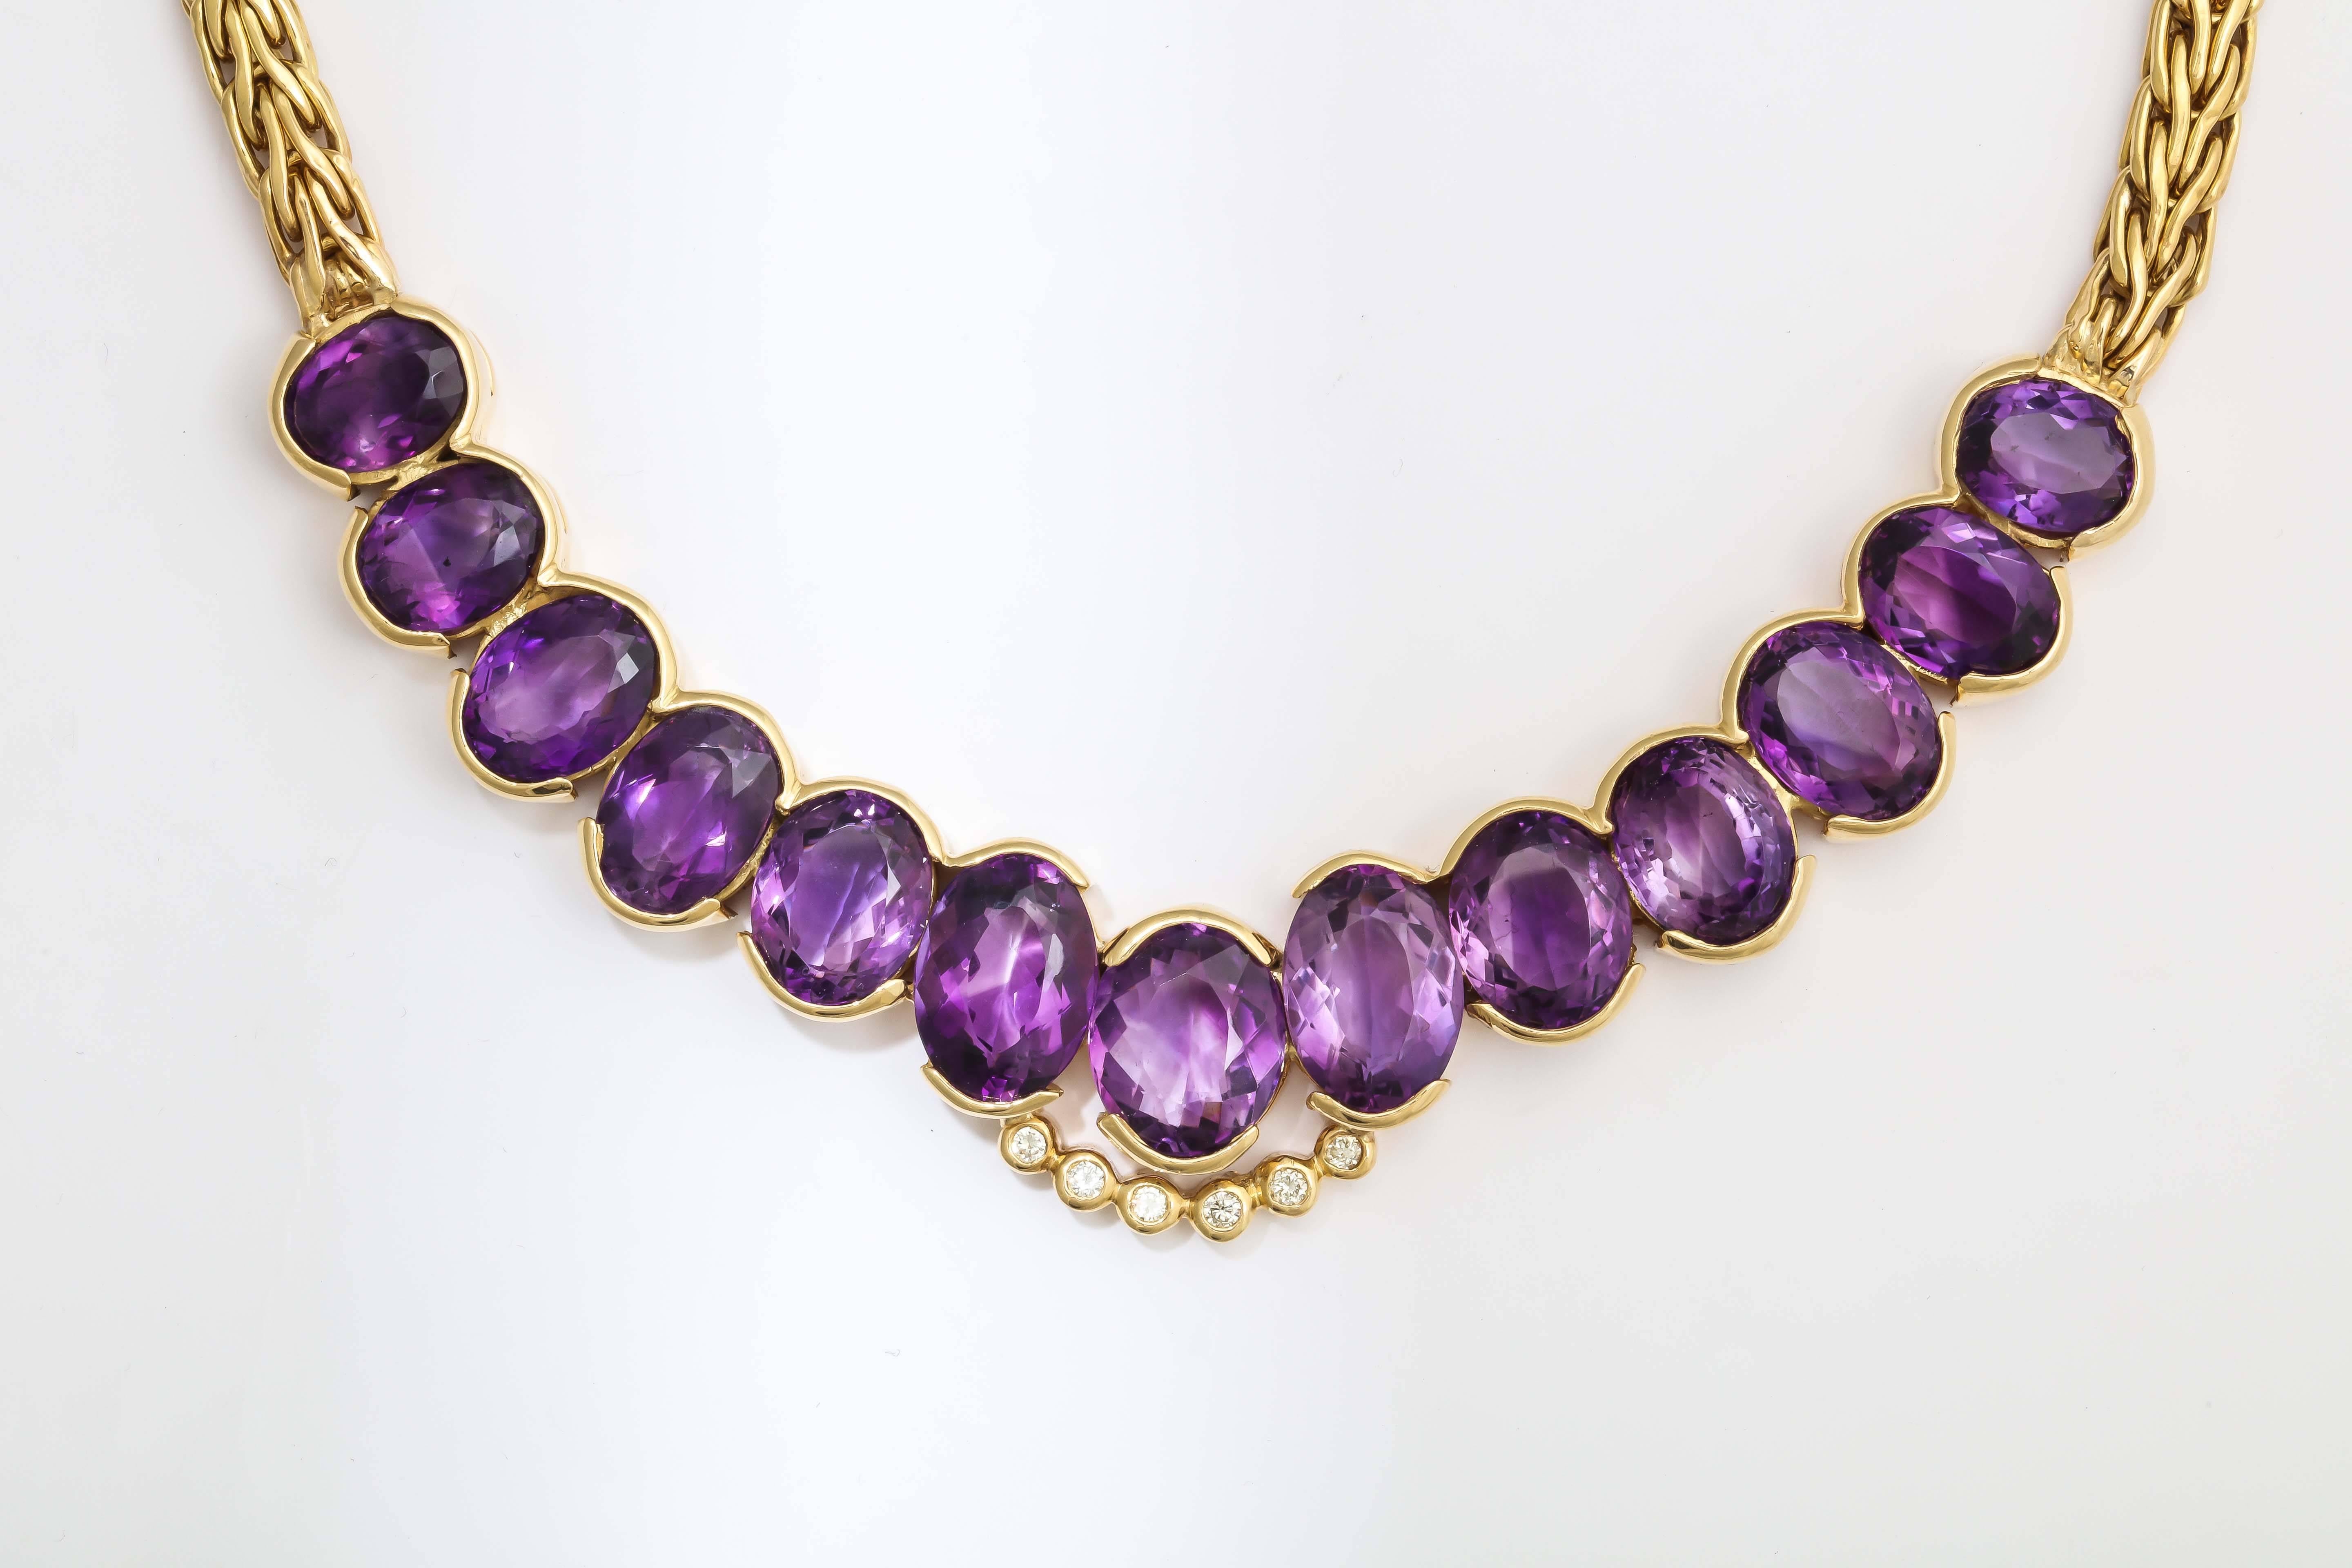 18kt Yellow gold Cable Link Necklace Embellished With 13 Faceted Beautiful color Amethyst stones Weighing Approximately 60 carats. Further Decorated With 6 full cut diamonds weighing .50cts. Made With A Beautiful Fancy Clasp With 1 Cabochon Sapphire